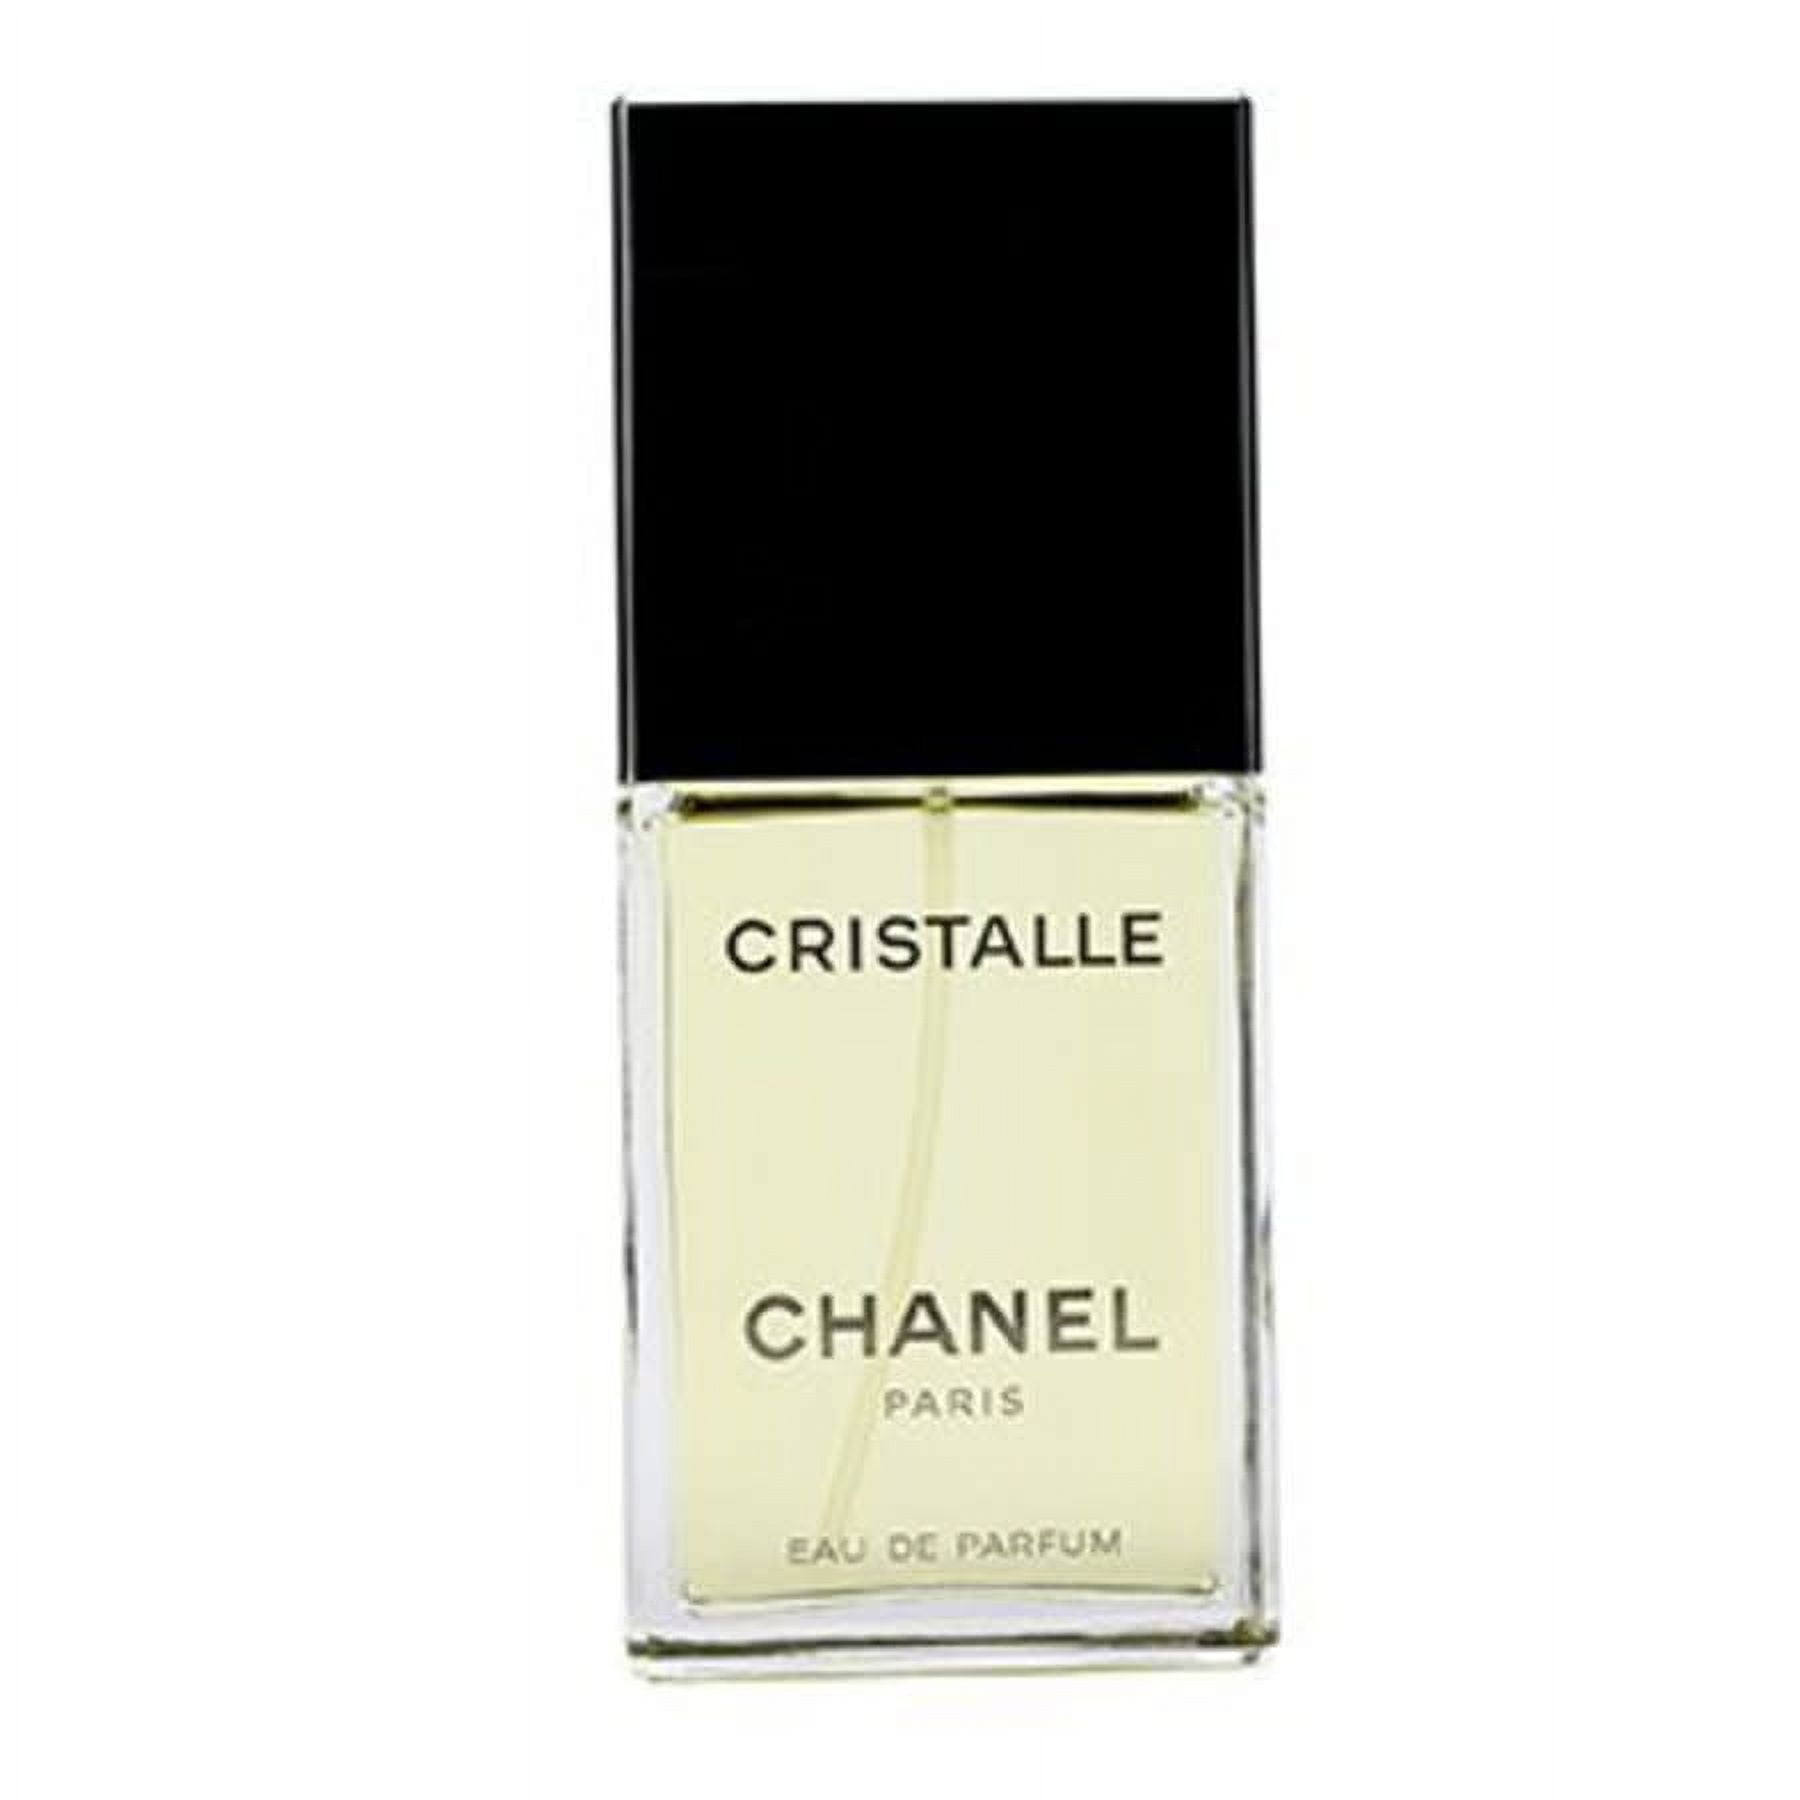 Buy Chanel Cristalle Eau De Toilette Spray 100ml/3.4oz Online at Low Prices  in India 